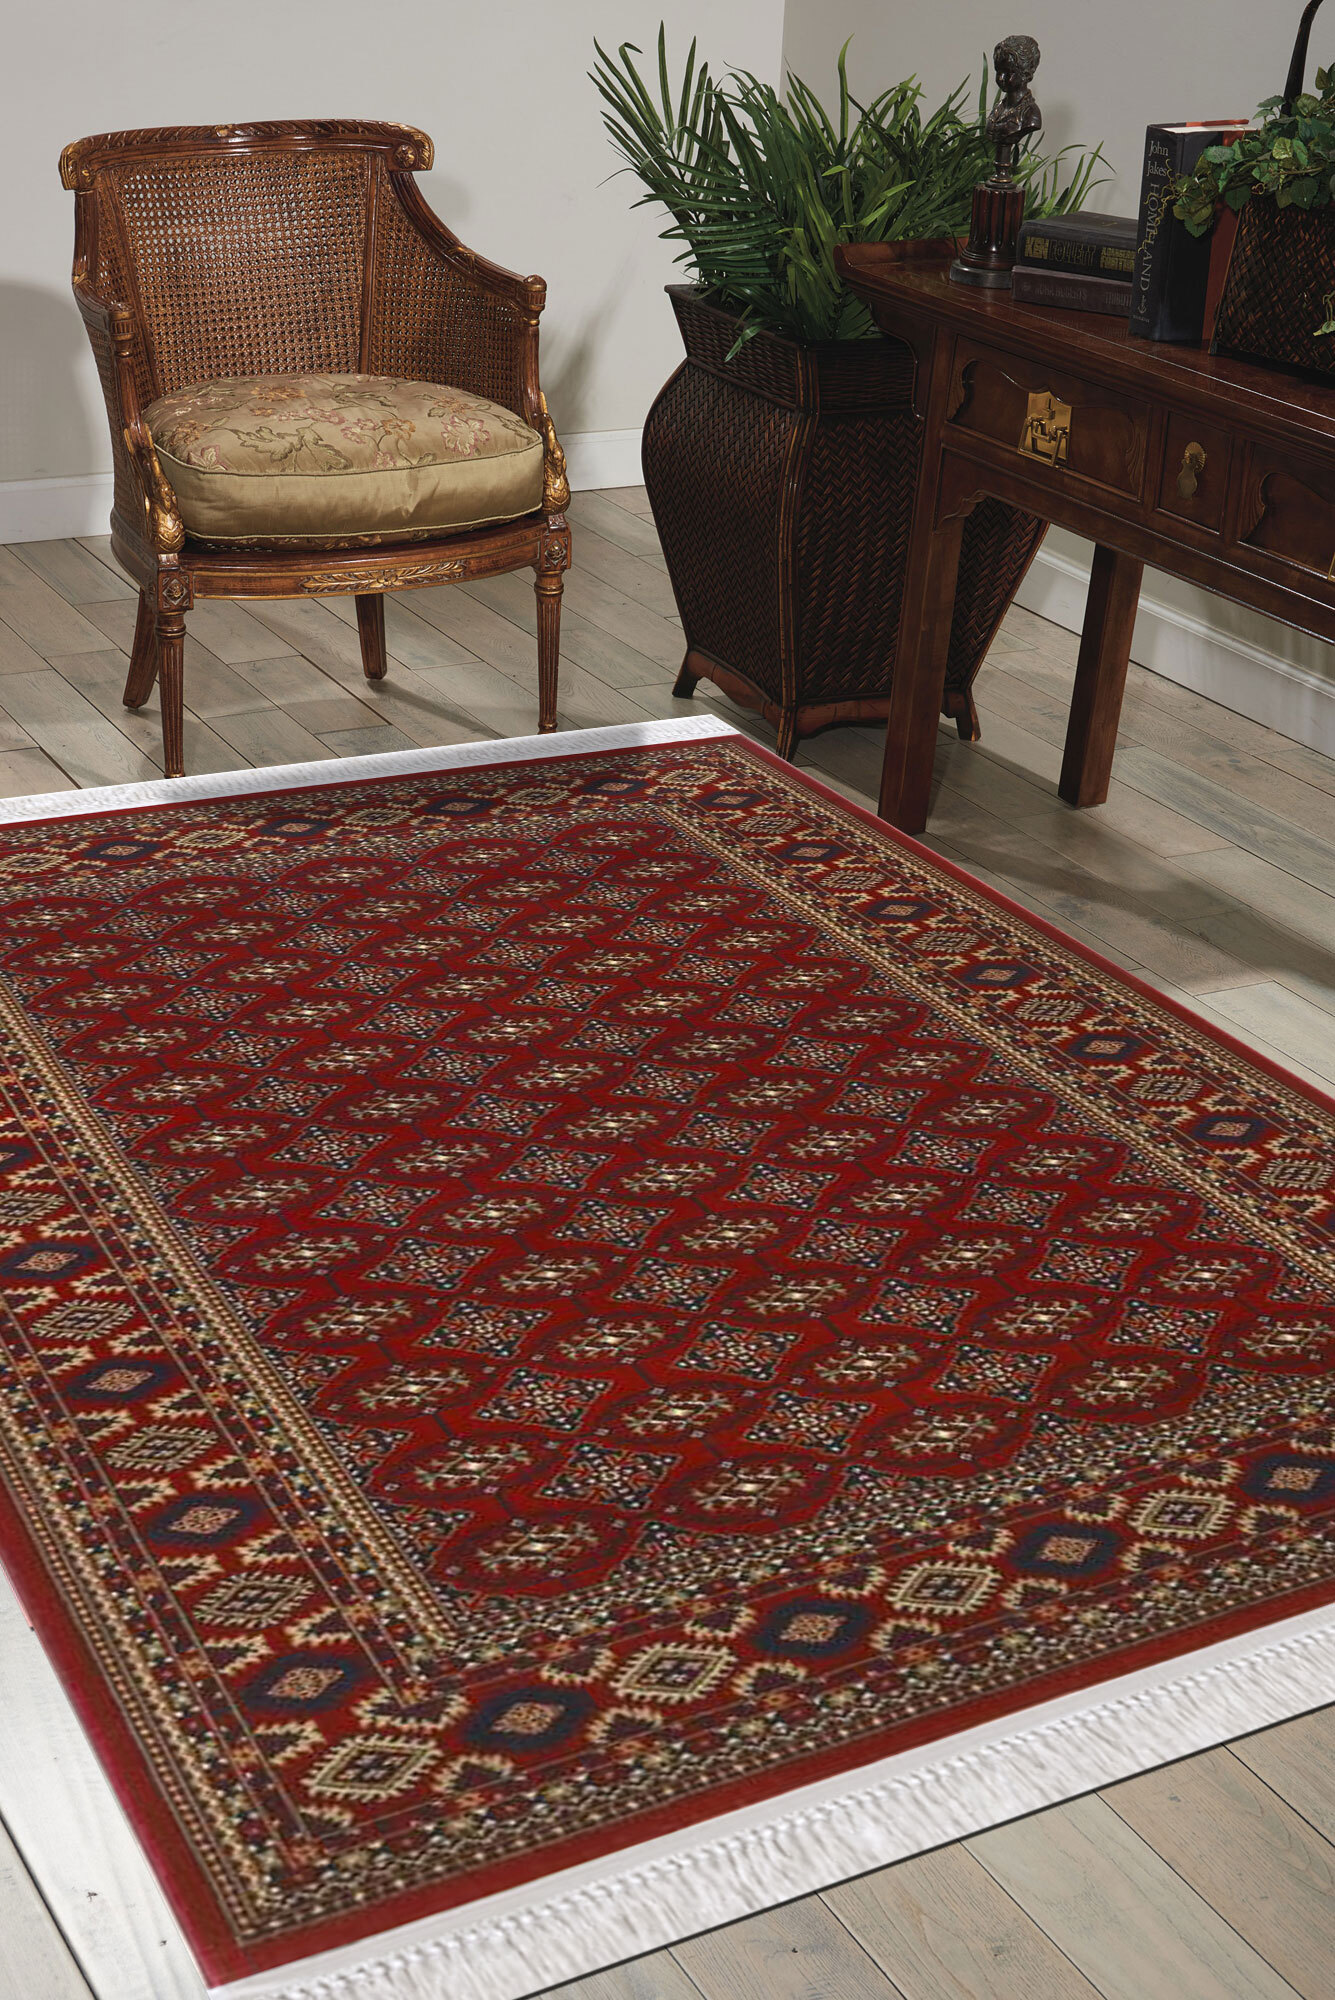 Red Traditional Afghan Rug(Size 170 x 120cm)